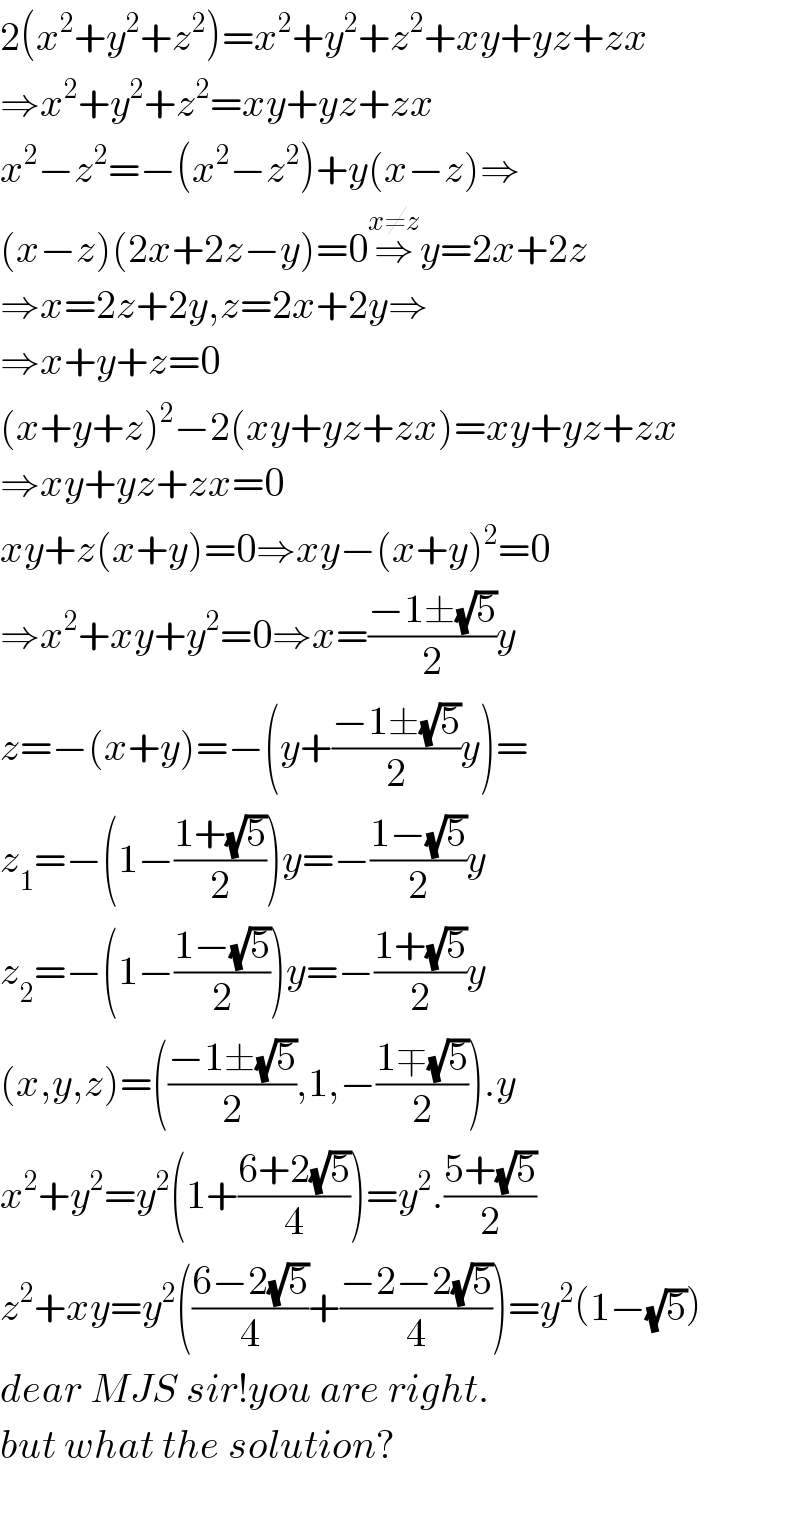 2(x^2 +y^2 +z^2 )=x^2 +y^2 +z^2 +xy+yz+zx  ⇒x^2 +y^2 +z^2 =xy+yz+zx  x^2 −z^2 =−(x^2 −z^2 )+y(x−z)⇒  (x−z)(2x+2z−y)=0⇒^(x≠z) y=2x+2z  ⇒x=2z+2y,z=2x+2y⇒  ⇒x+y+z=0  (x+y+z)^2 −2(xy+yz+zx)=xy+yz+zx  ⇒xy+yz+zx=0  xy+z(x+y)=0⇒xy−(x+y)^2 =0  ⇒x^2 +xy+y^2 =0⇒x=((−1±(√5))/2)y  z=−(x+y)=−(y+((−1±(√5))/2)y)=  z_1 =−(1−((1+(√5))/2))y=−((1−(√5))/2)y  z_2 =−(1−((1−(√5))/2))y=−((1+(√5))/2)y  (x,y,z)=(((−1±(√5))/2),1,−((1∓(√5))/2)).y  x^2 +y^2 =y^2 (1+((6+2(√5))/4))=y^2 .((5+(√5))/2)  z^2 +xy=y^2 (((6−2(√5))/4)+((−2−2(√5))/4))=y^2 (1−(√5))  dear MJS sir!you are right.  but what the solution?    